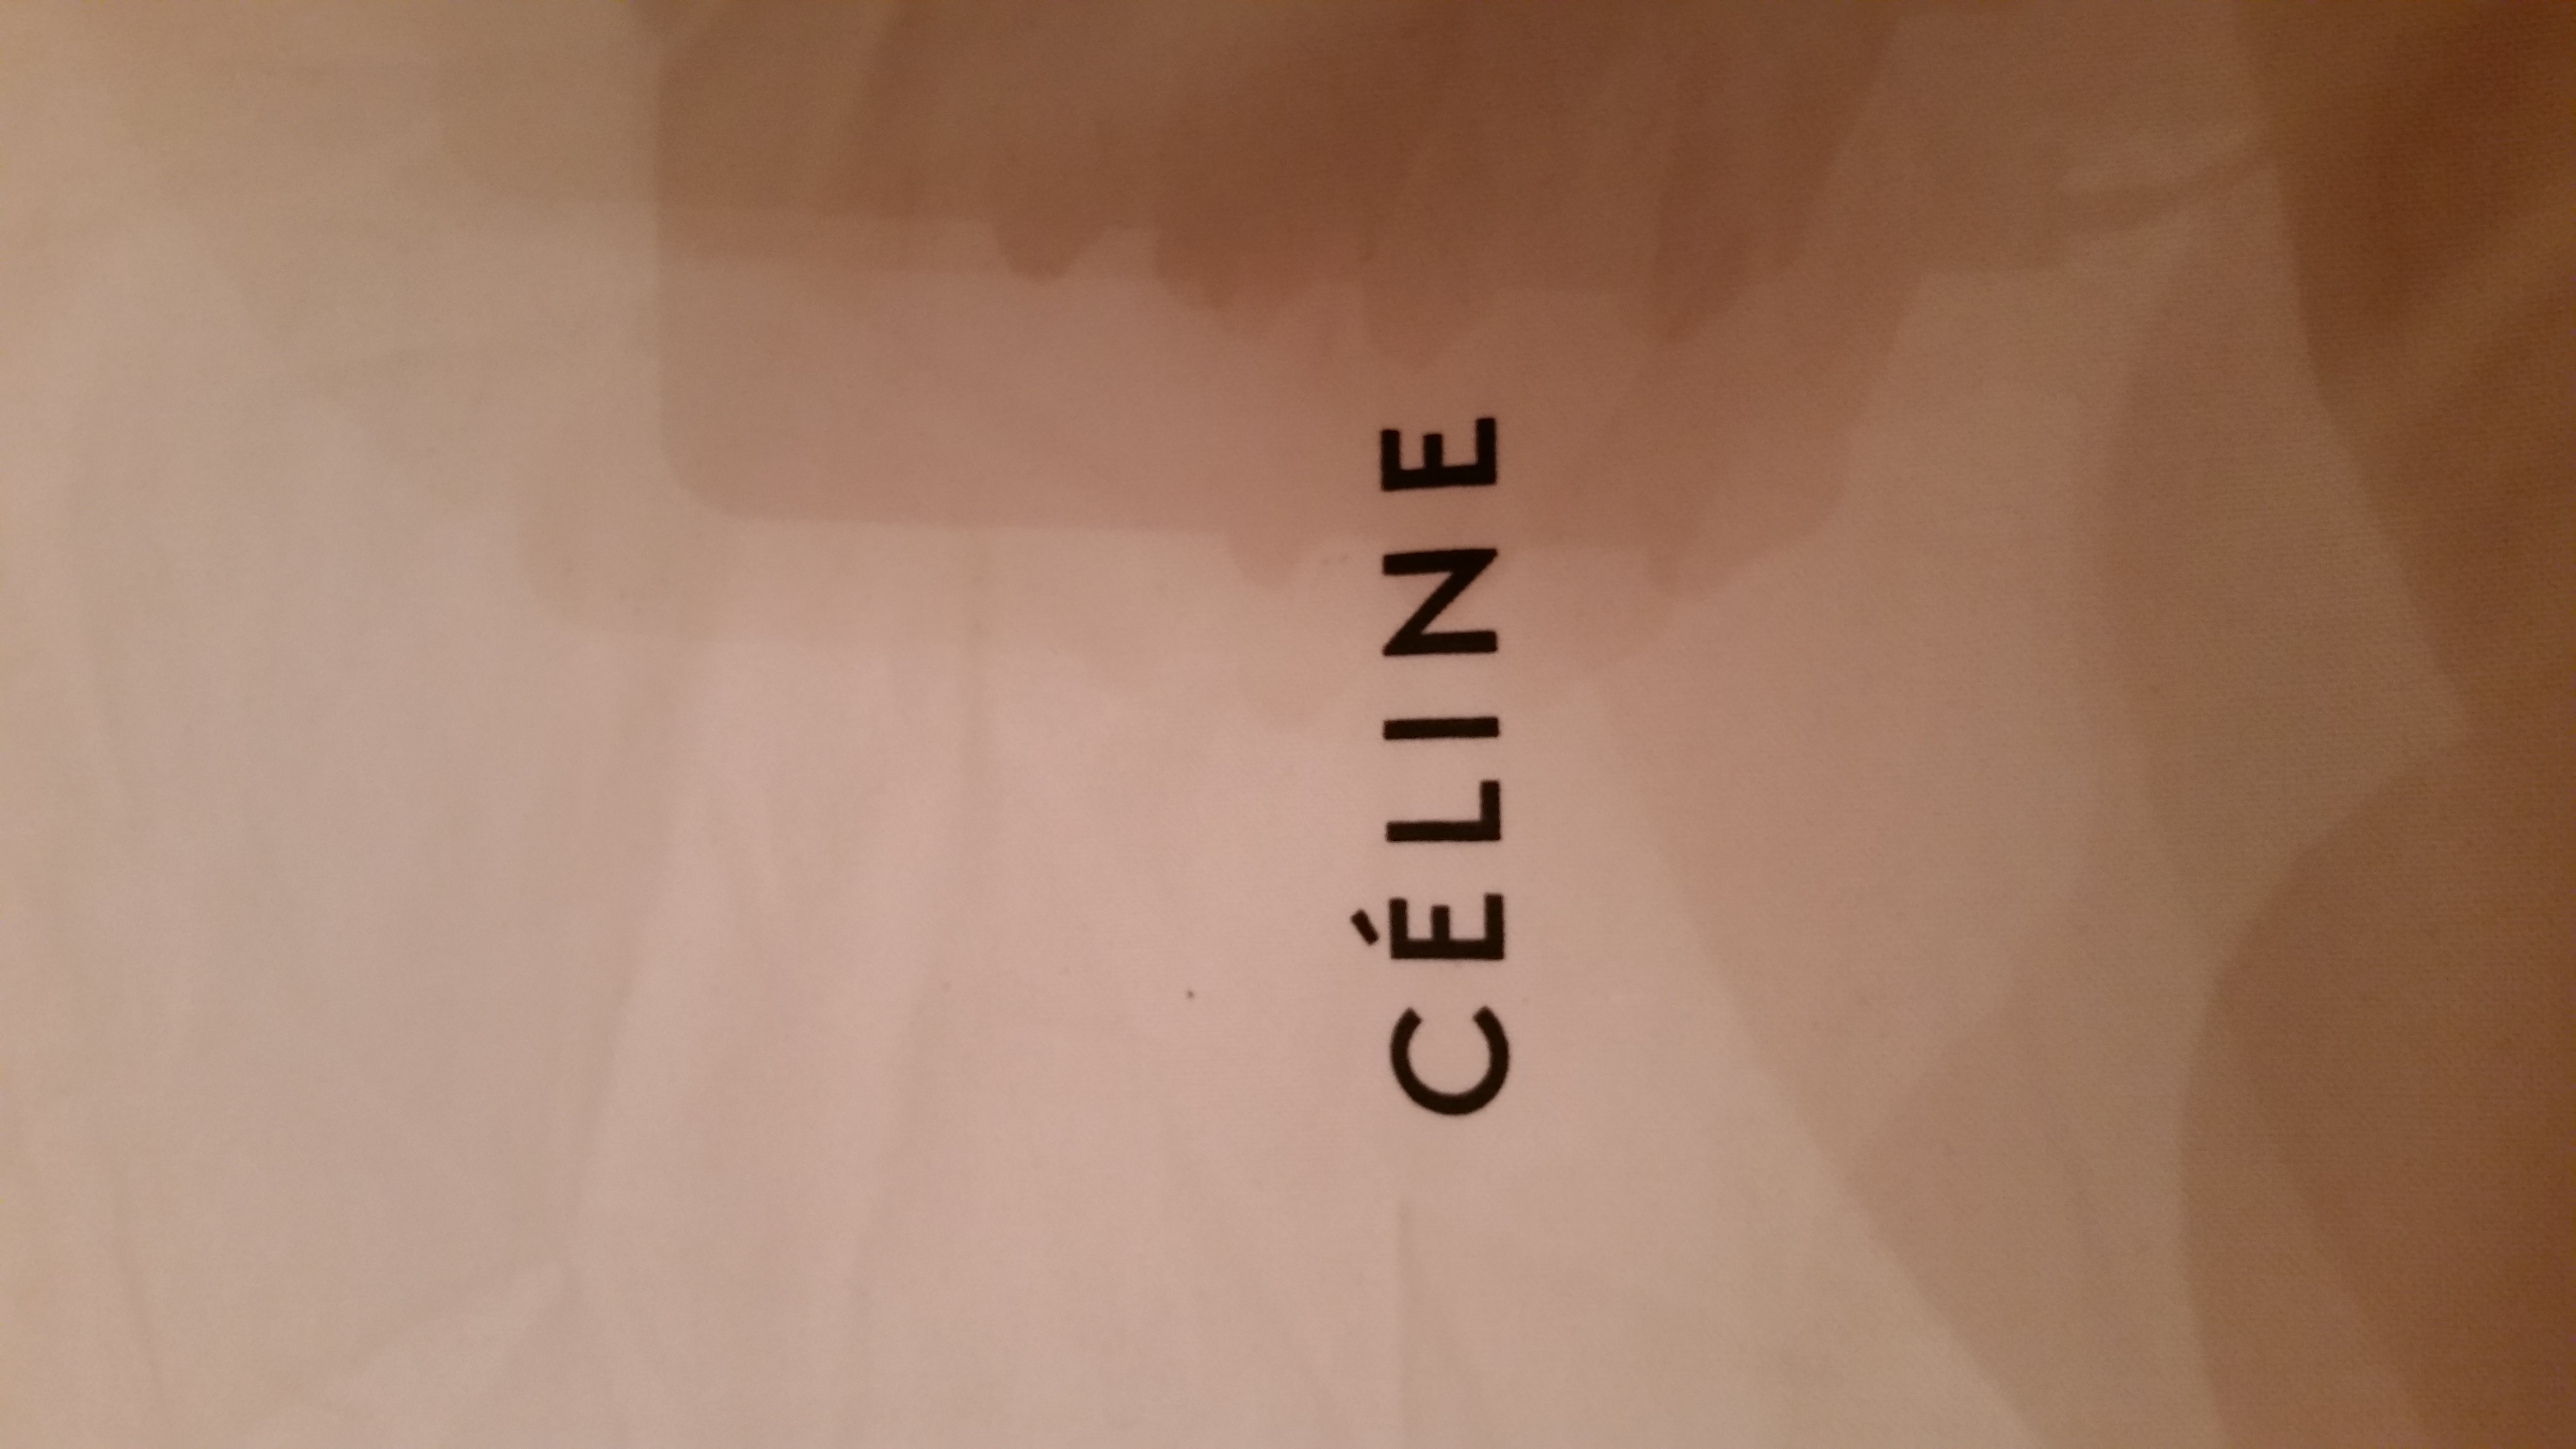 I Almost Lost 1640 USD On A Fake Celine Bag Through